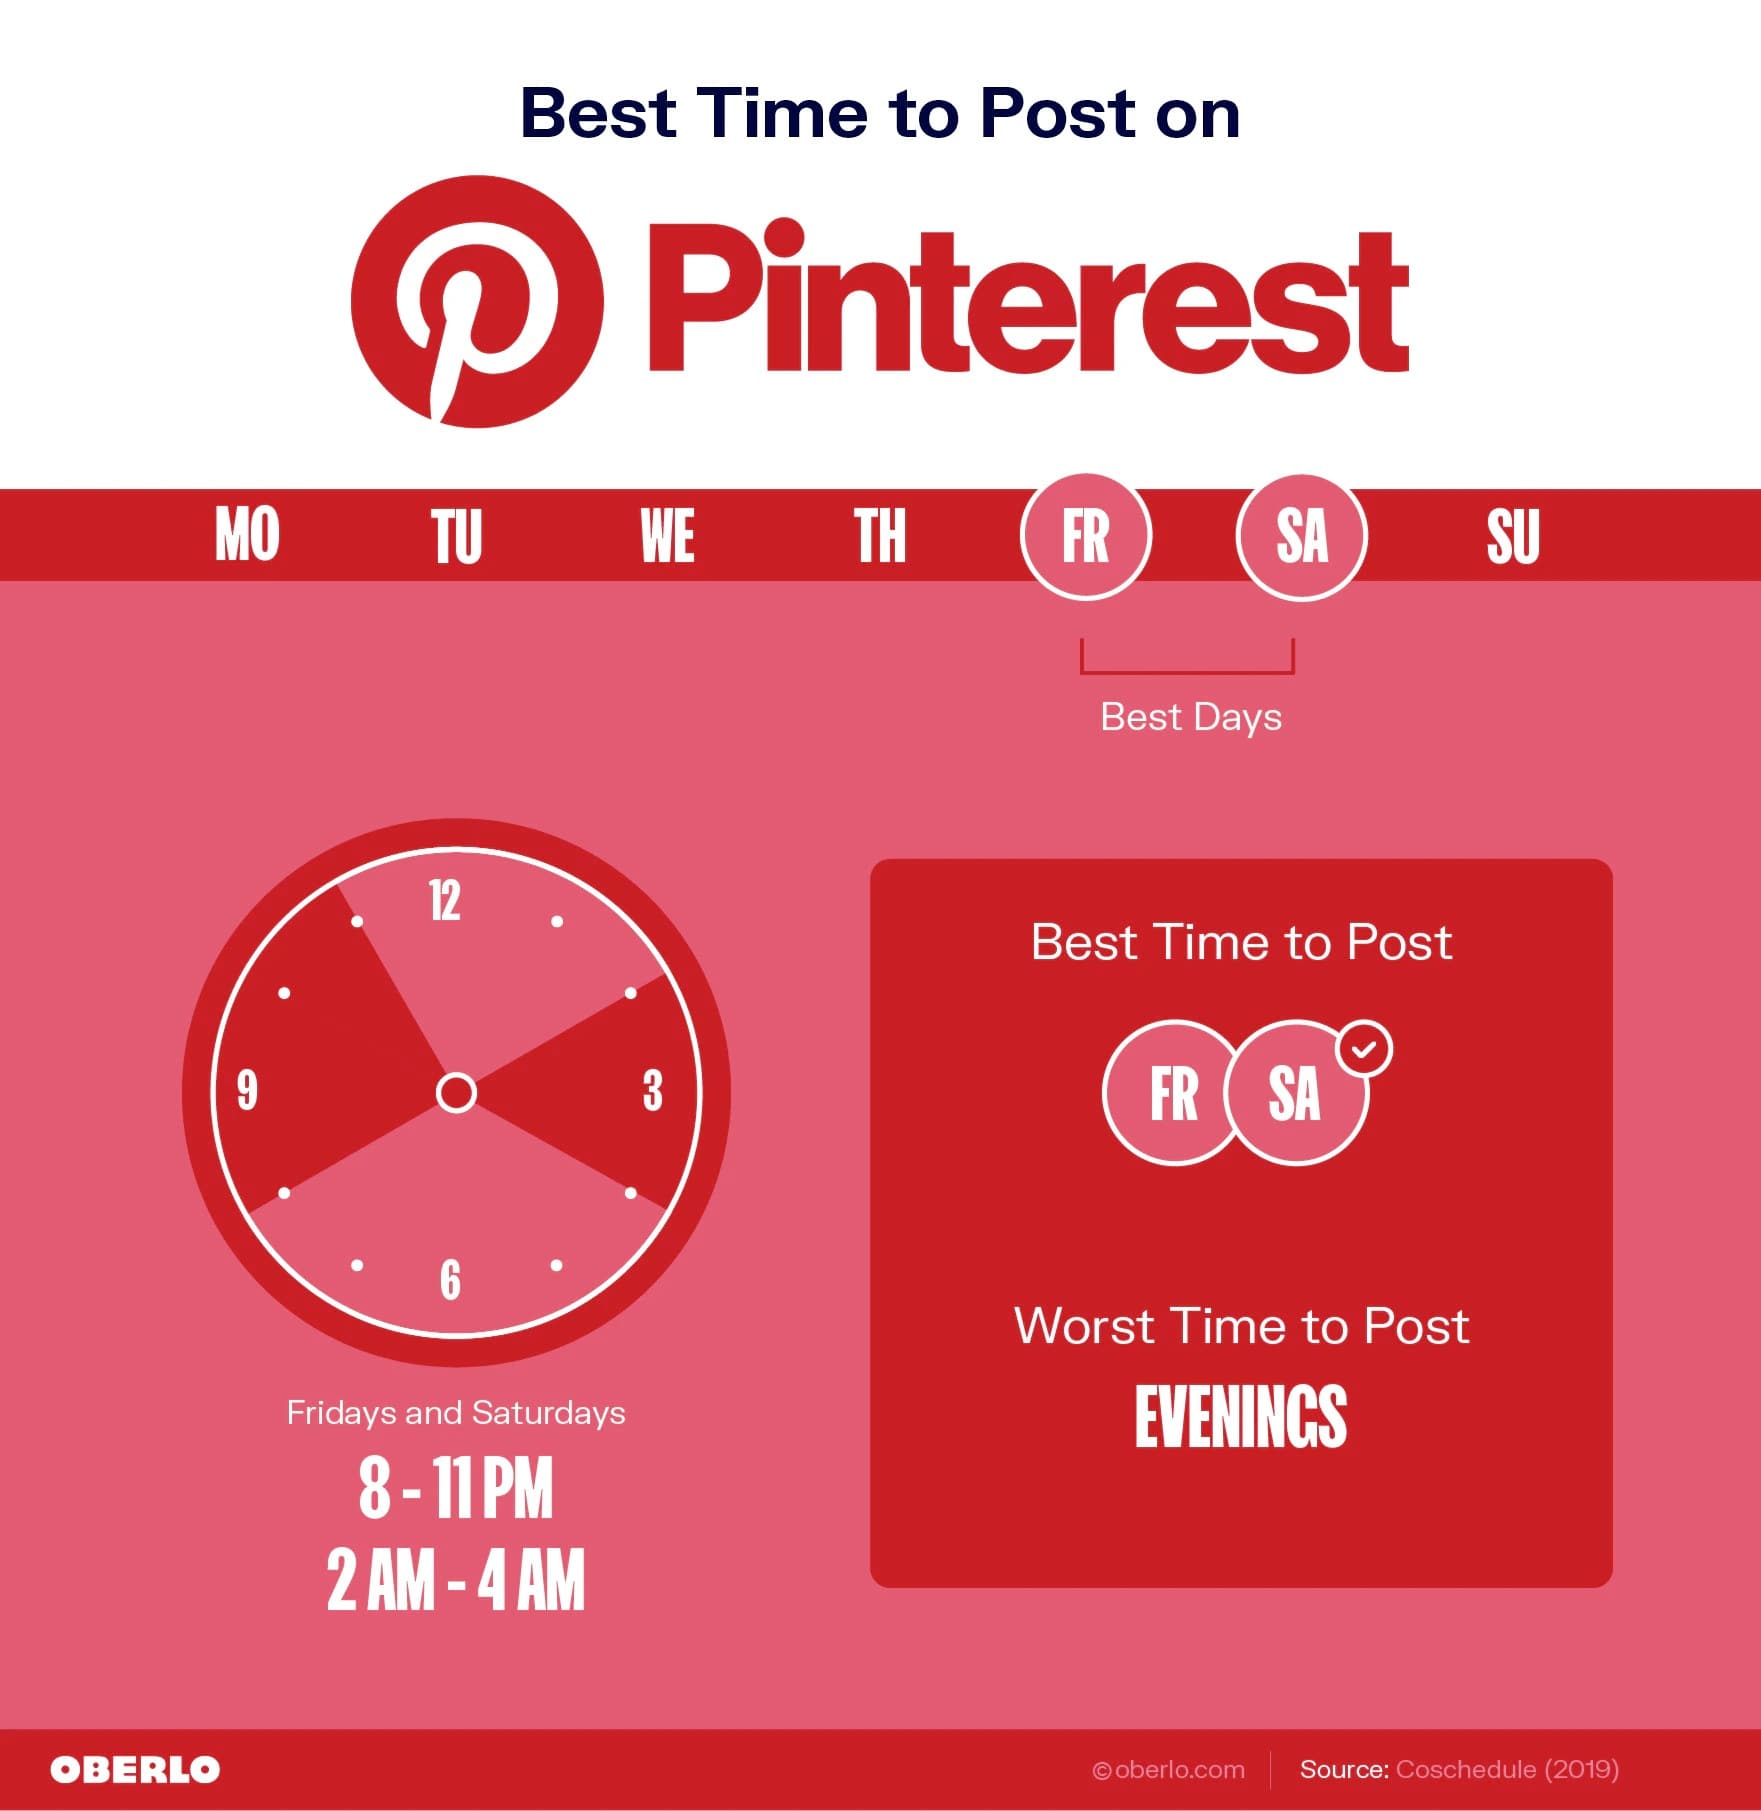 Best time to post on Pinterest